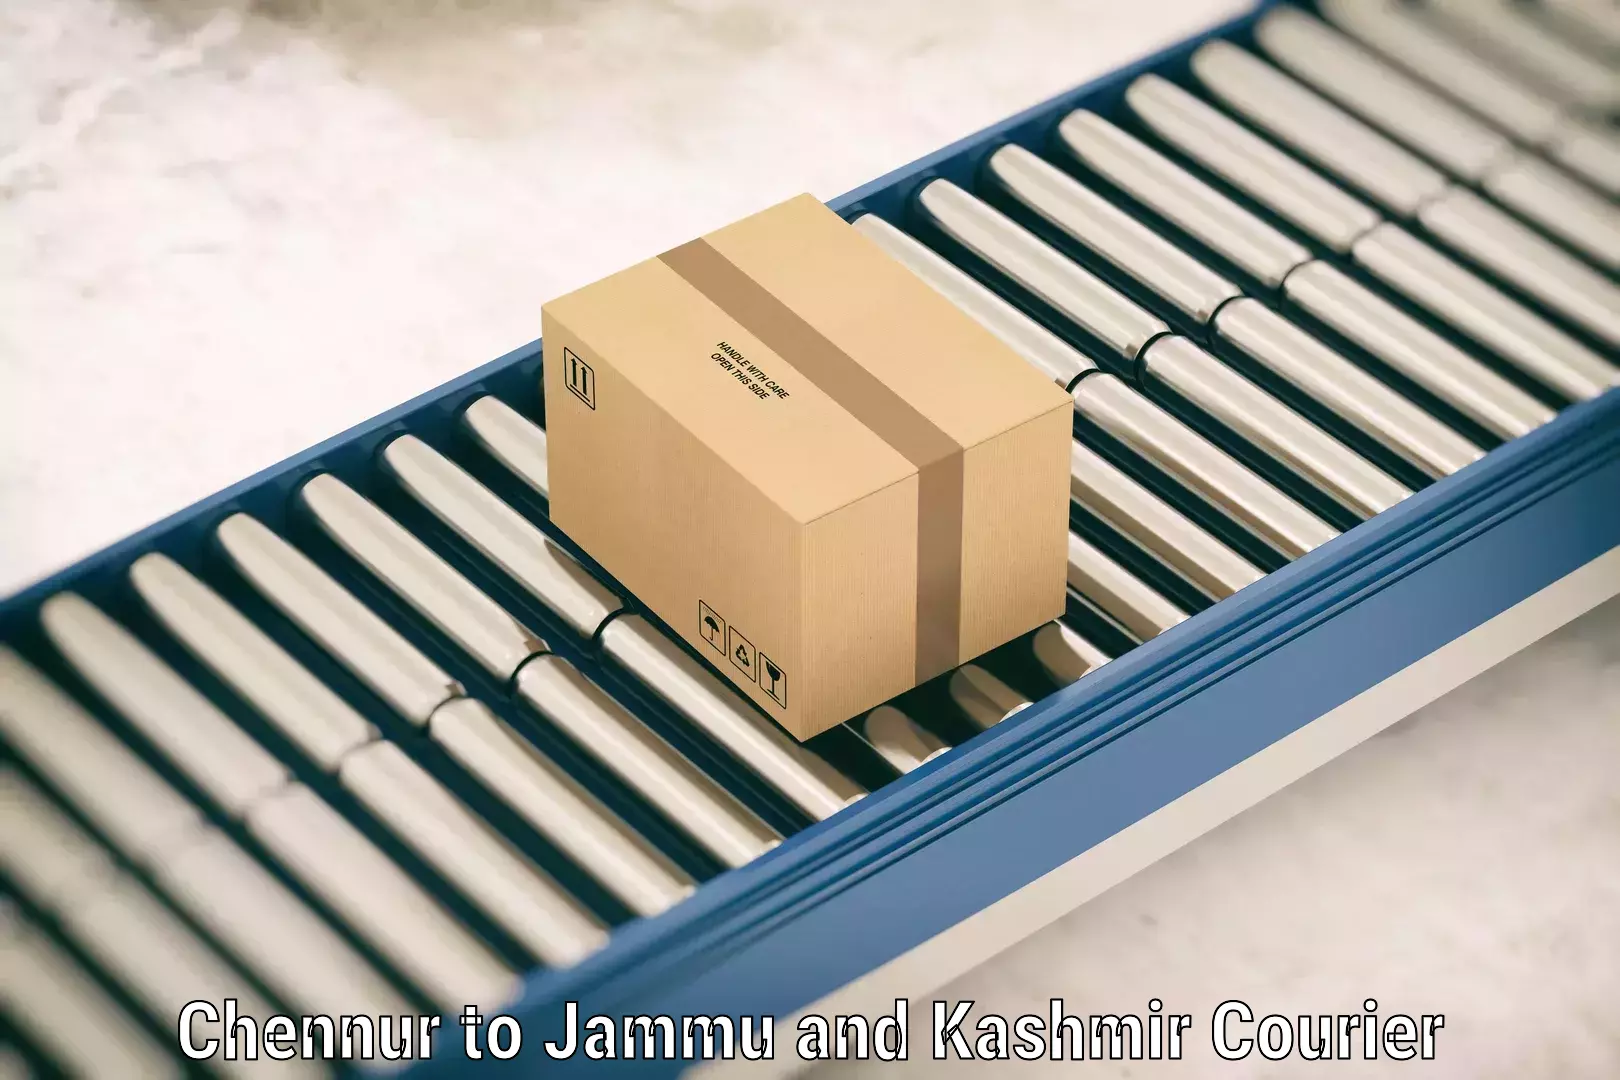 Baggage shipping experience Chennur to Jammu and Kashmir